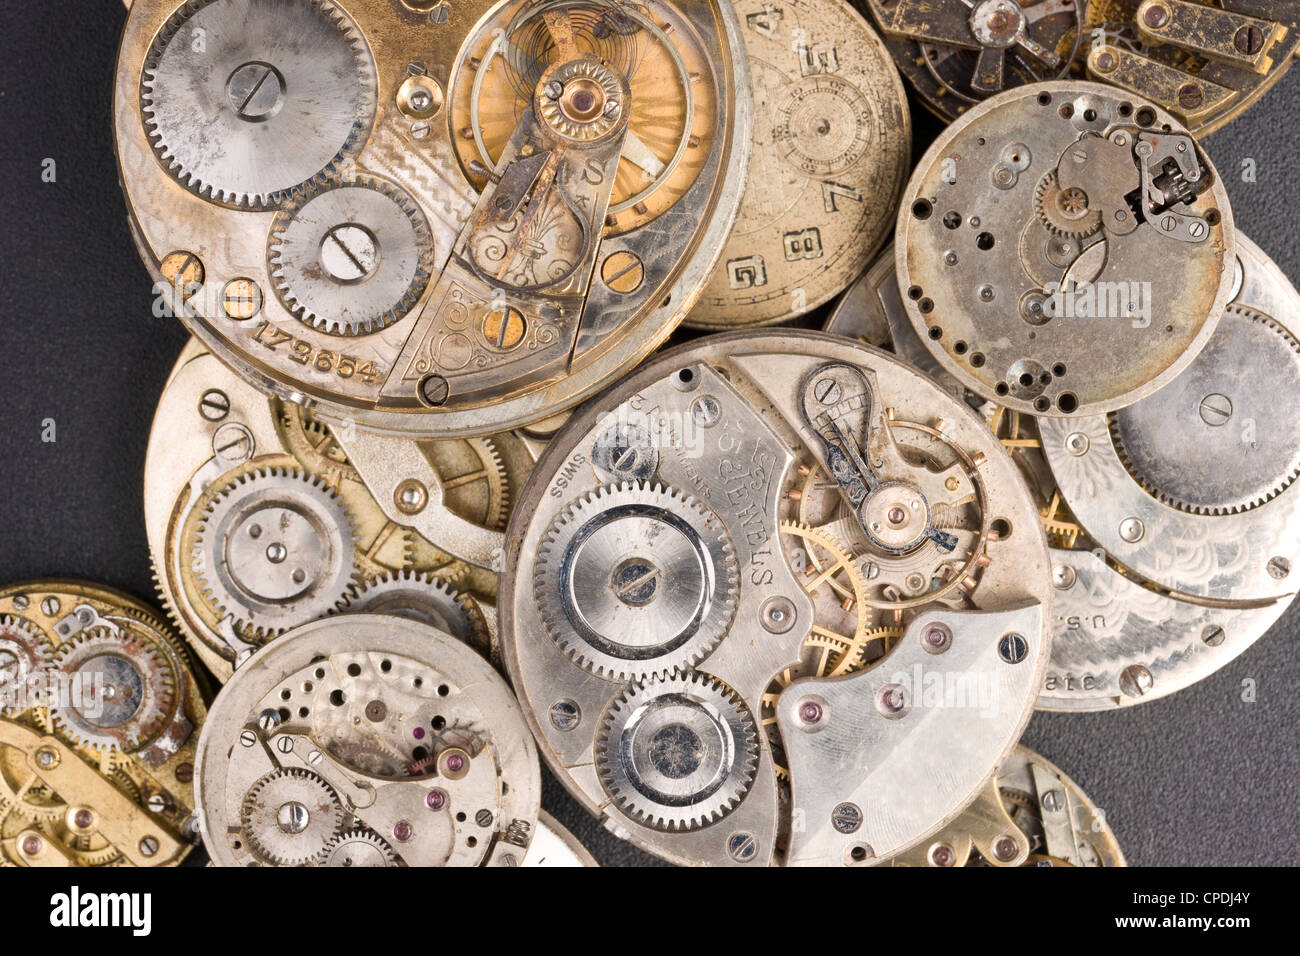 Random Pile of Old Mechanical Watch Parts Stock Photo - Image of